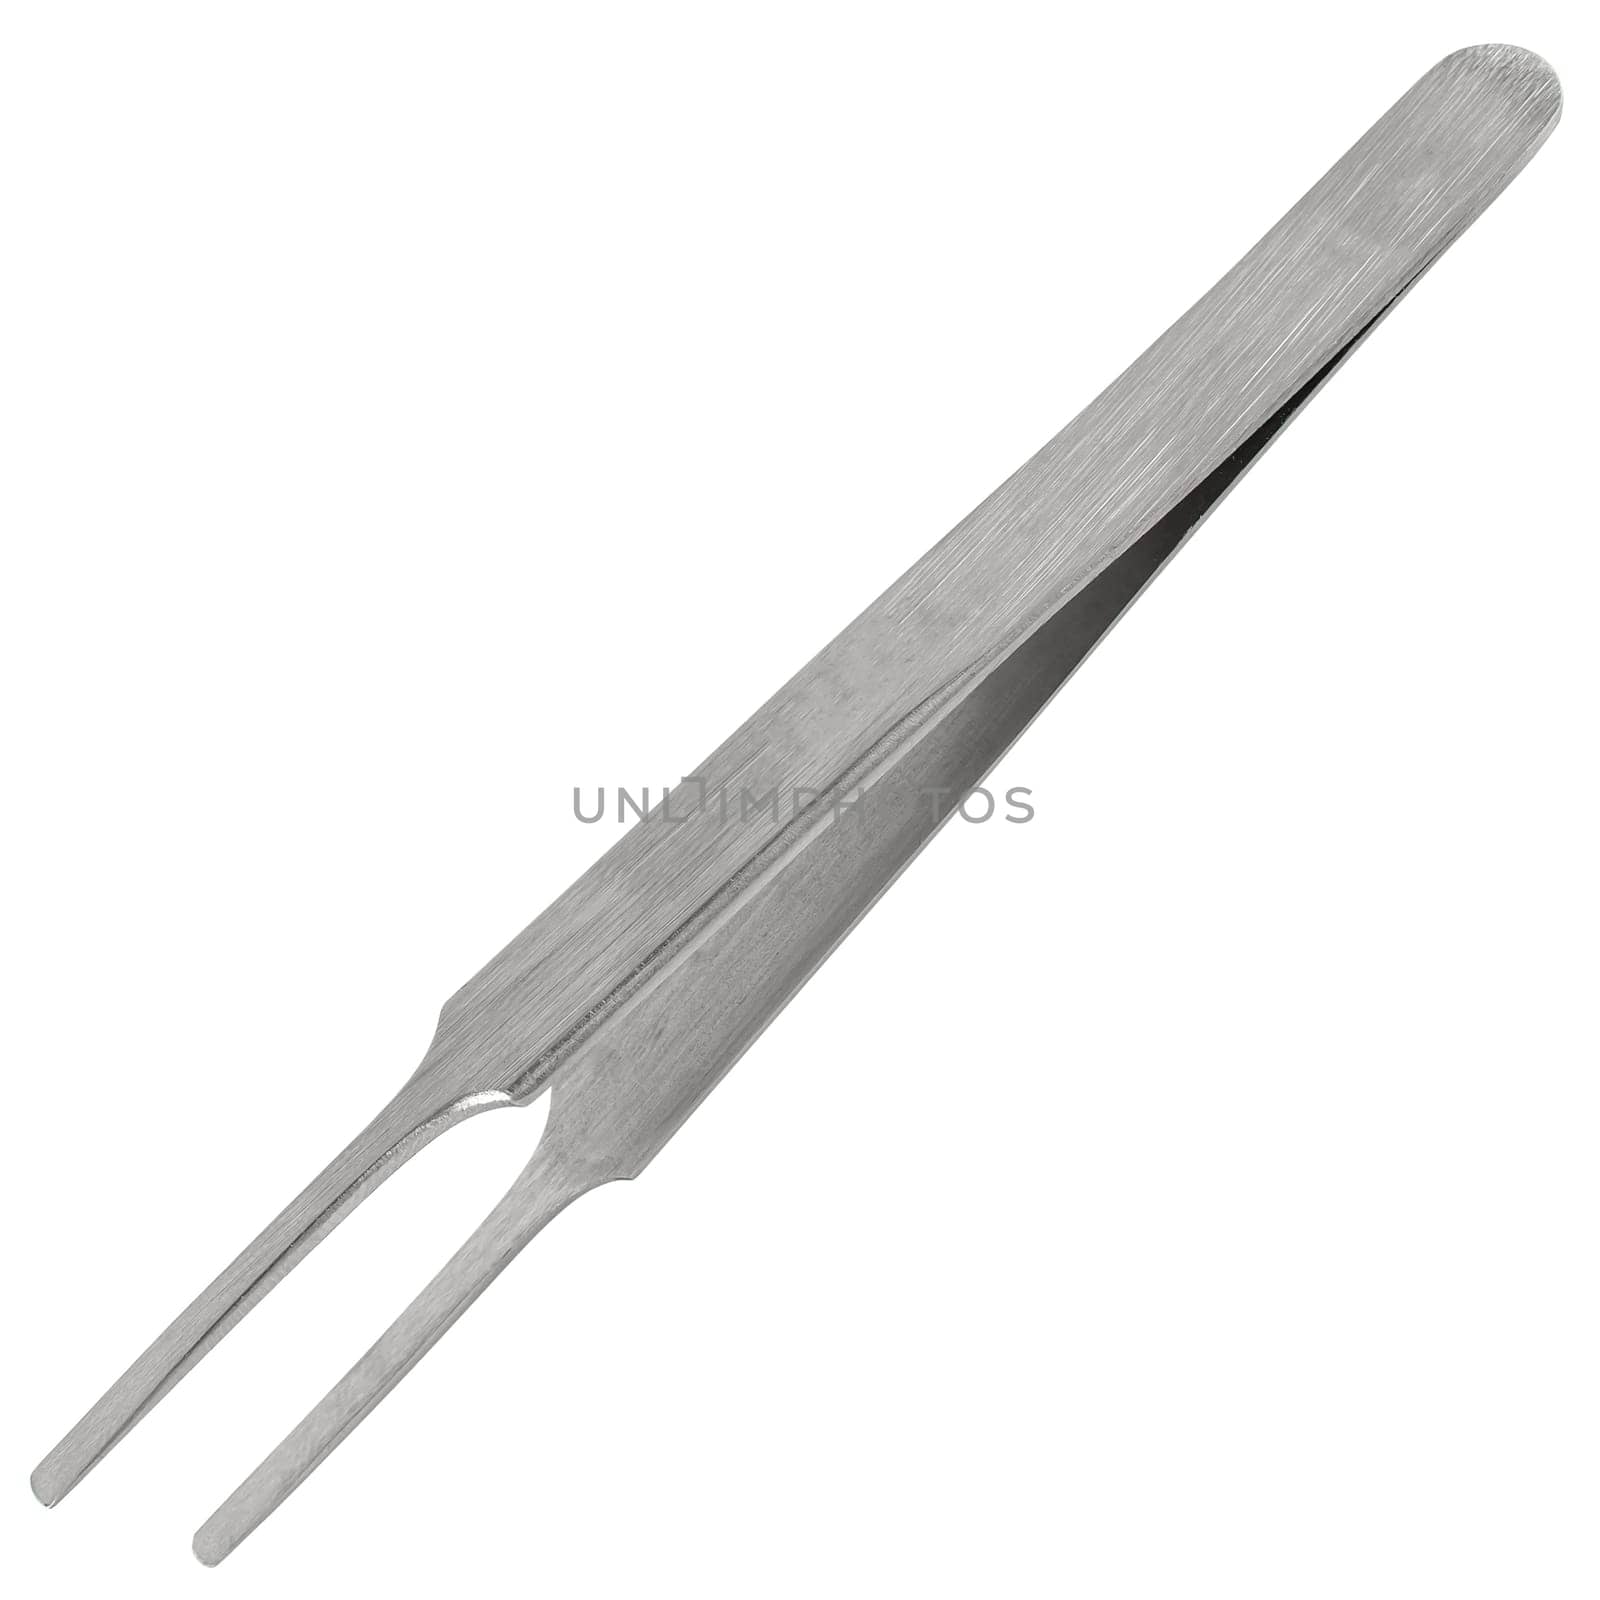 Tweezers, a tool for manipulating small objects, on white background by A_A